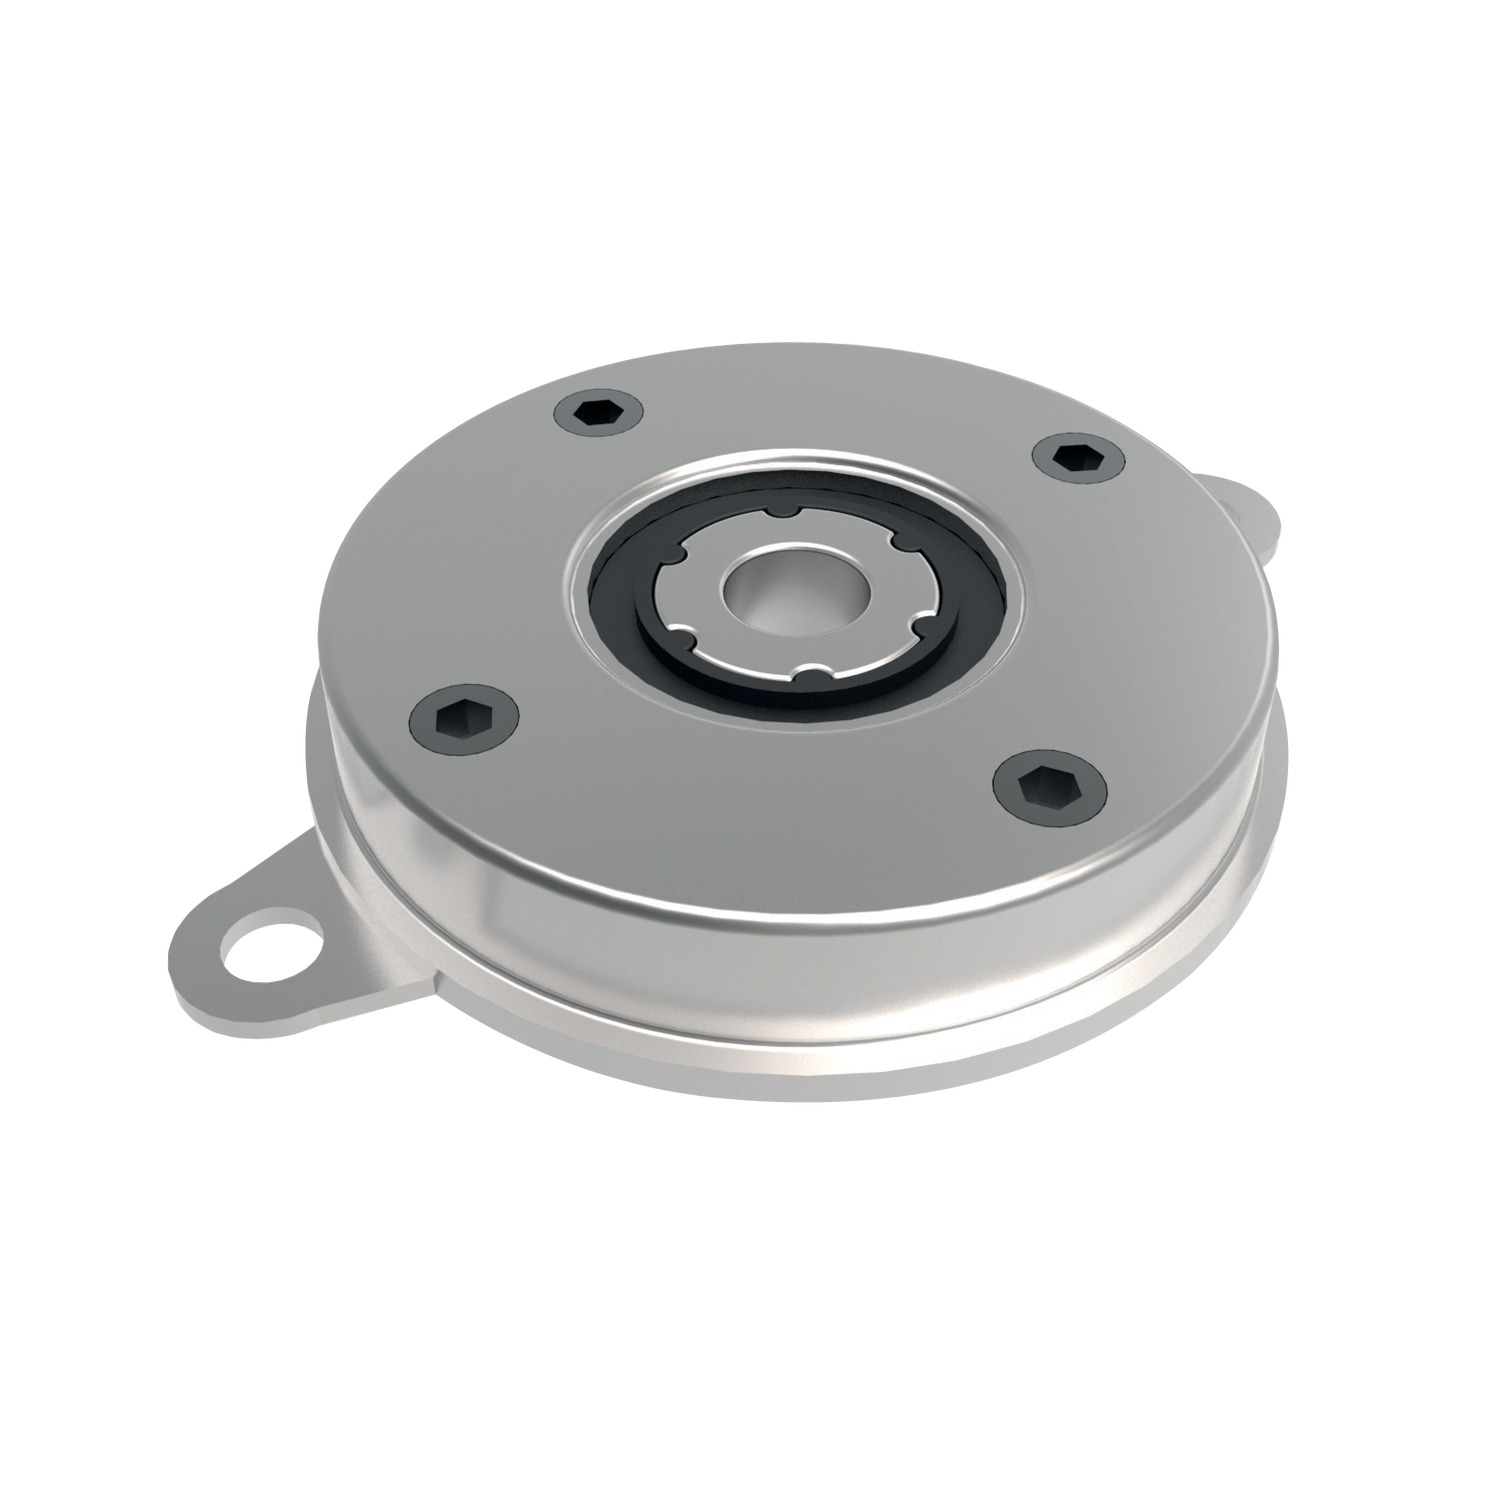 Disk Dampers Steel bodied uni-directional disk dampers, for continuous movement in a chosen dampening direction. Supports up to 85 Kgf.cm.